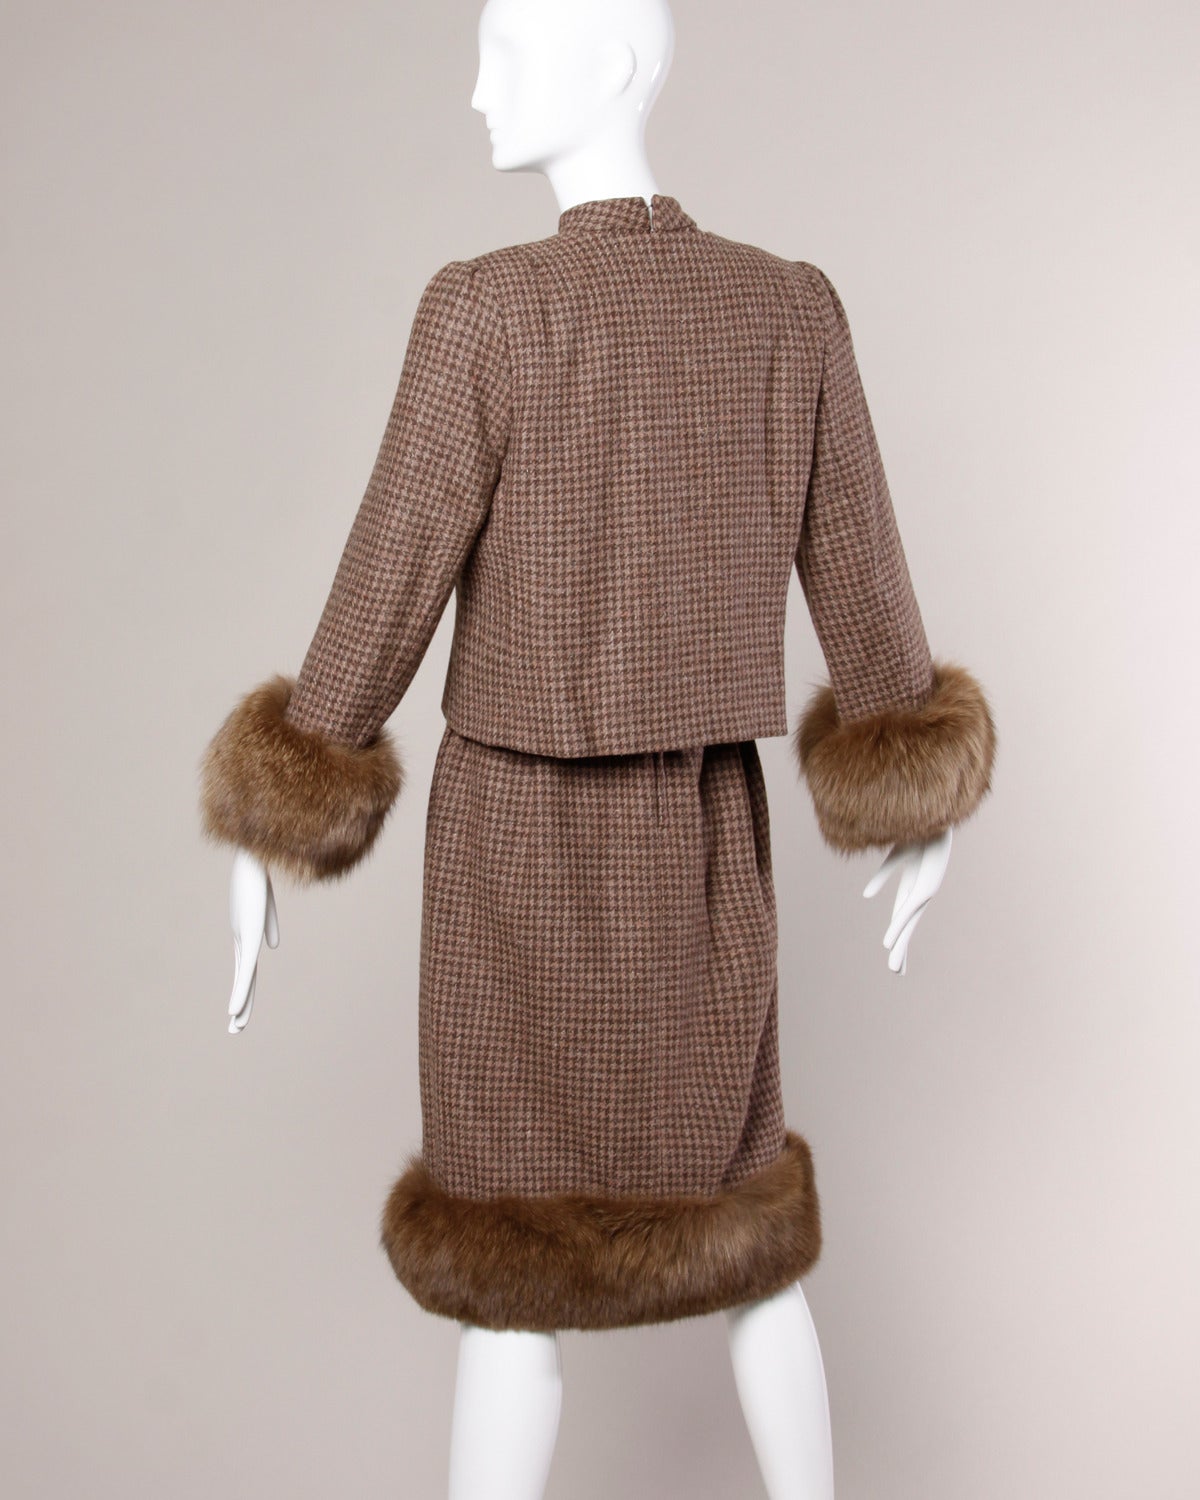 Wool dress and jacket ensemble with plush fox fur trim by Richilene for Elizabeth Arden. Both pieces can be worn separately or together!

Details:

Fully Lined
Side Pockets
Hook Closure On Jacket
Back Zip and Hook Closure On Dress
Estimated